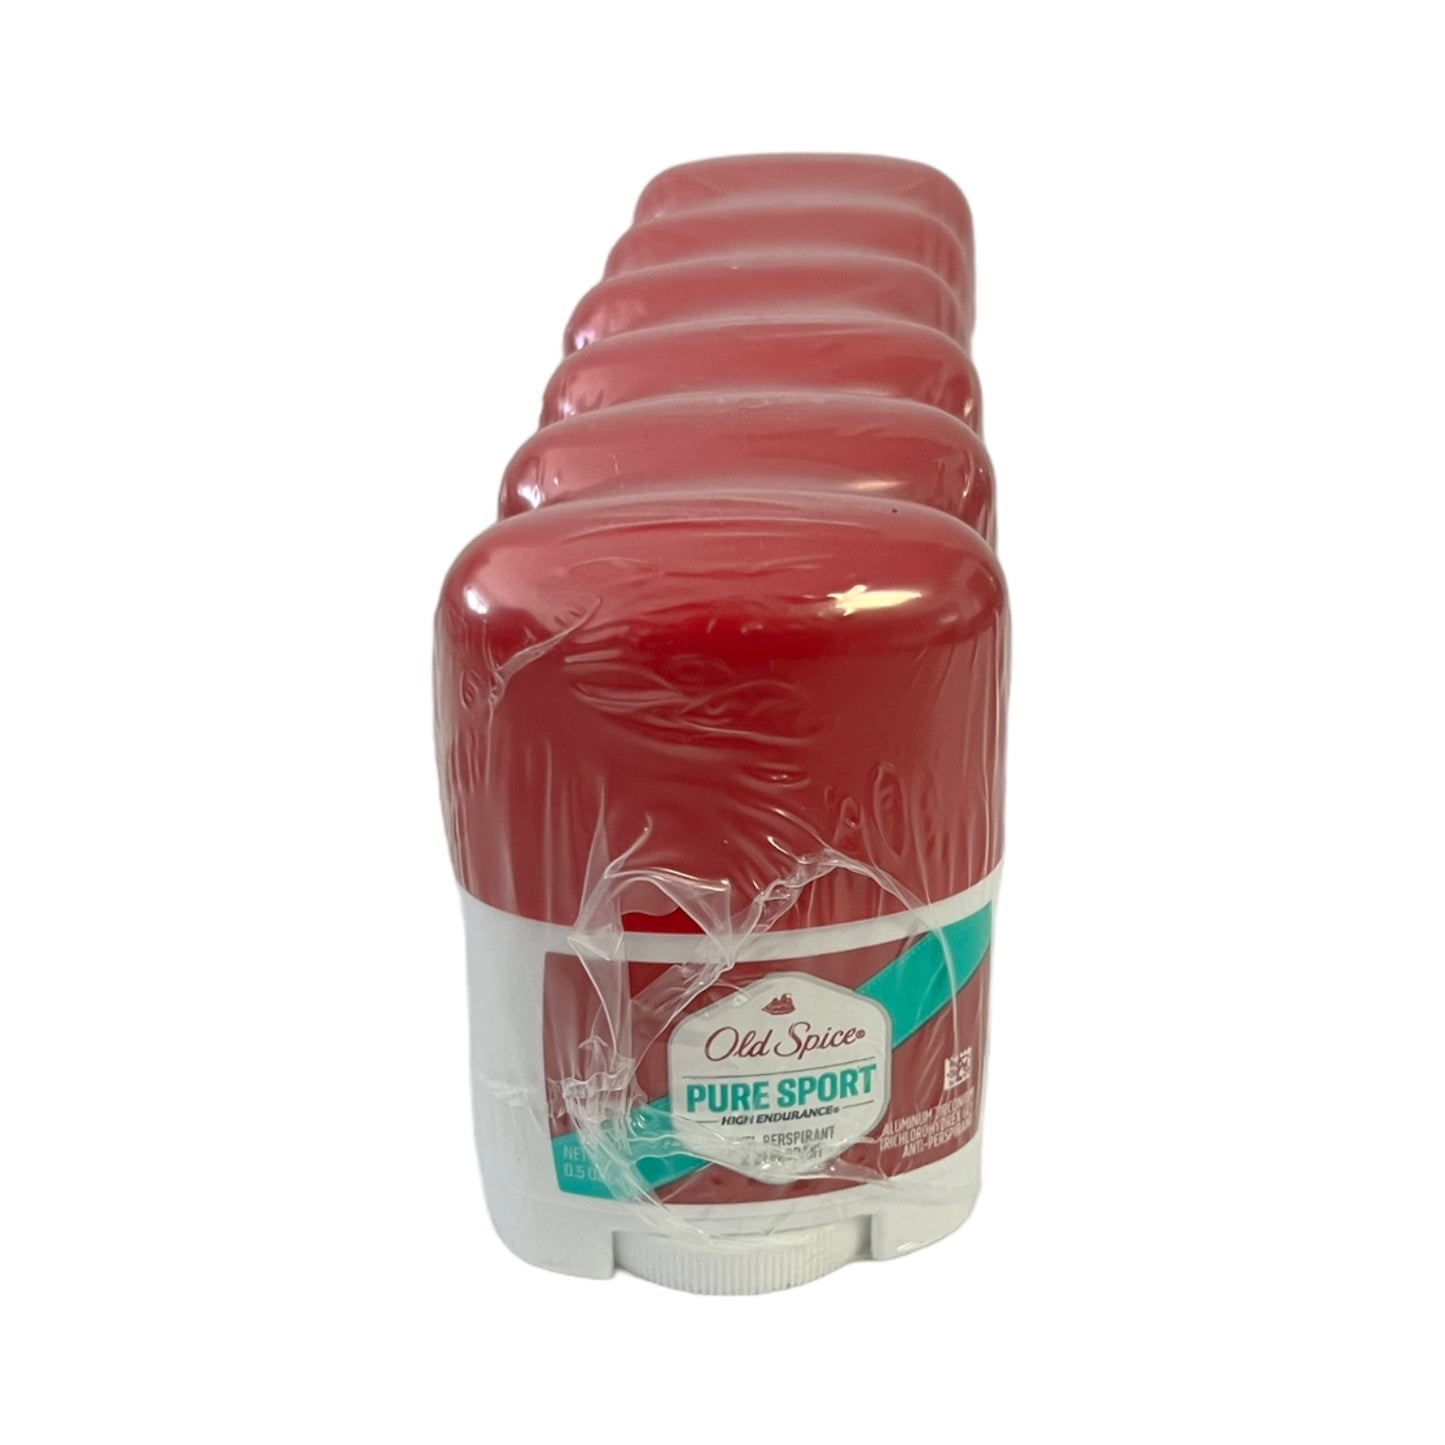 Old Spice Pure Sport 0.5OZ 6-Pack